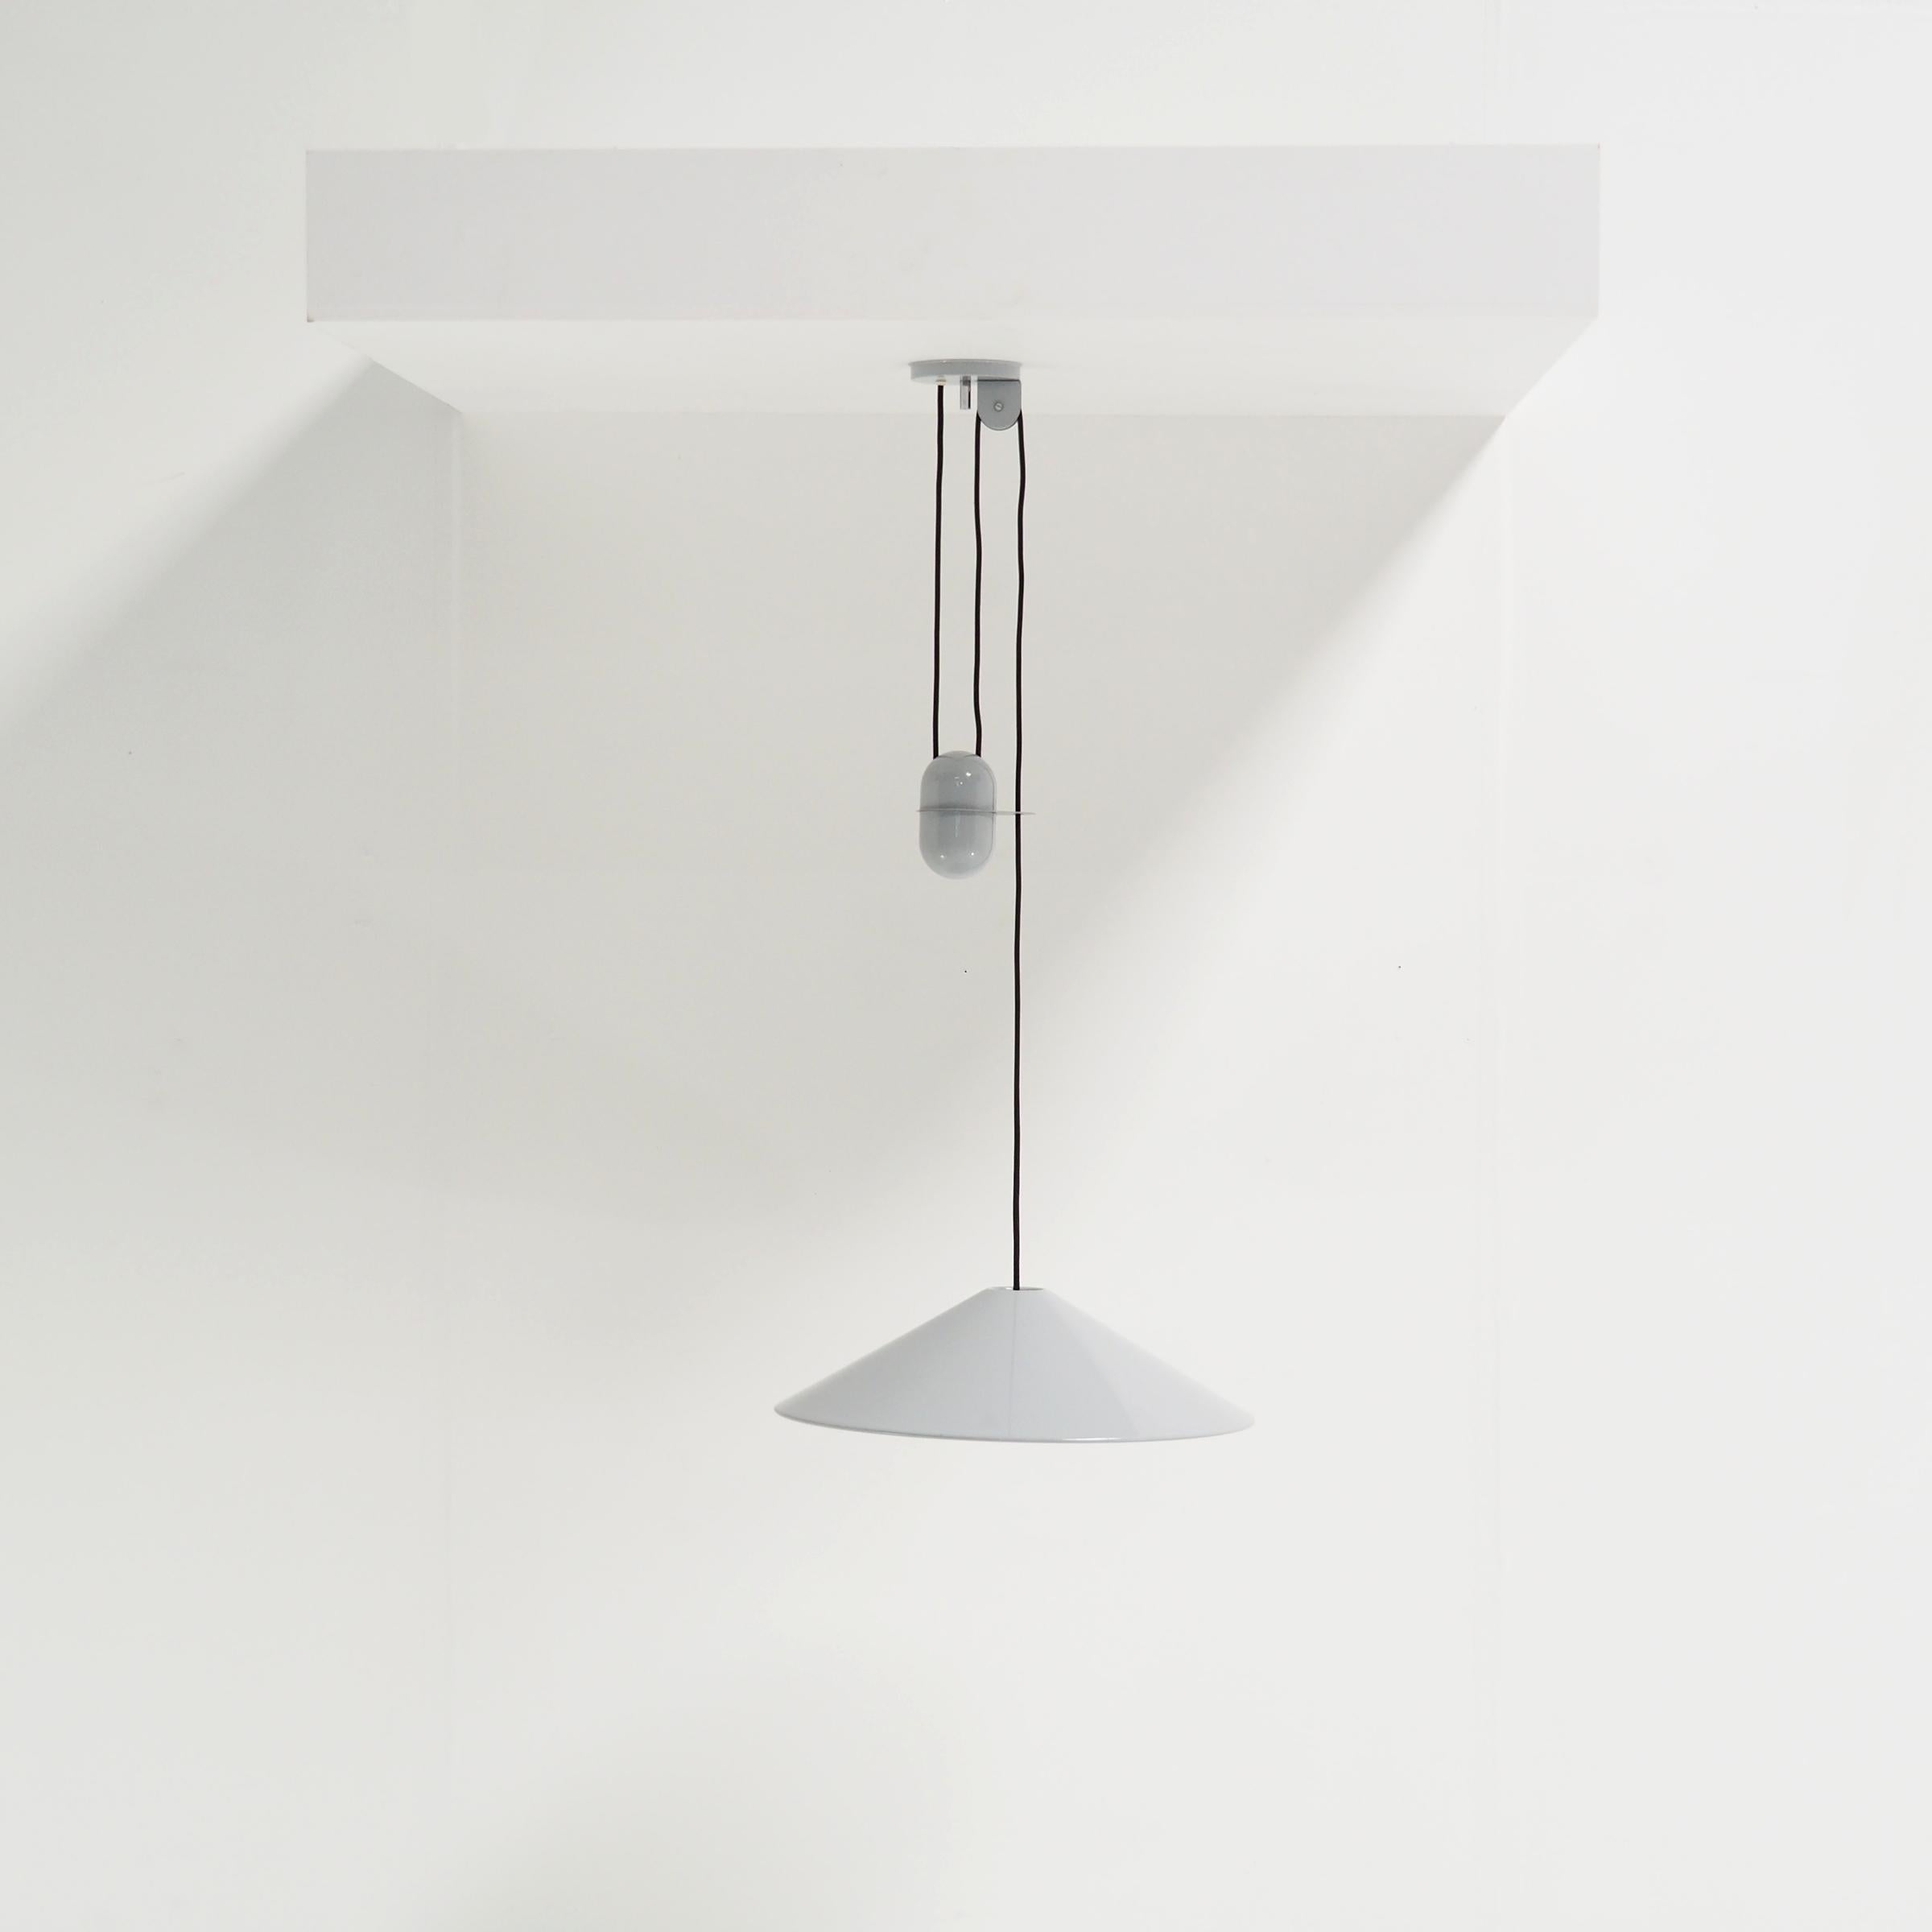 Counterweight pendant designed by Italian designer Goffredo Reggiani. Reggiani was the founder of Reggiani Spa Illuminazione, founded in 1957.

The lamp has been professionally rewired by my restorer and restored where necessary. Therefore it’s in